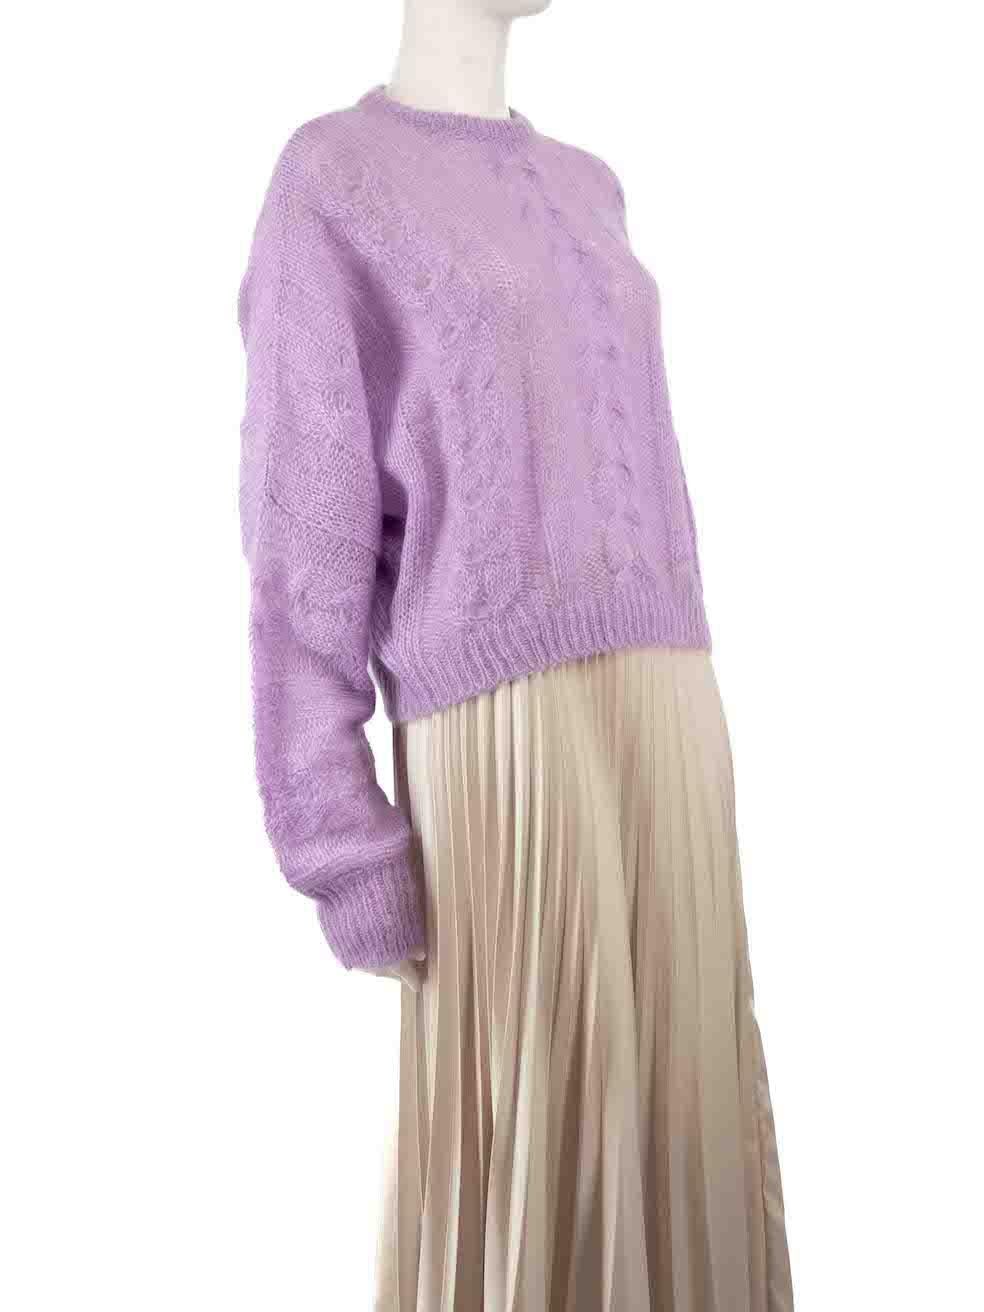 CONDITION is Very good. Hardly any visible wear to jumper is evident on this used MIU MIU designer resale item.
 
 
 
 Details
 
 
 Purple
 
 Wool
 
 Knit jumper
 
 Long sleeves
 
 Round neck
 
 Sheer
 
 Cropped fit
 
 
 
 
 
 Made in Italy
 
 
 
